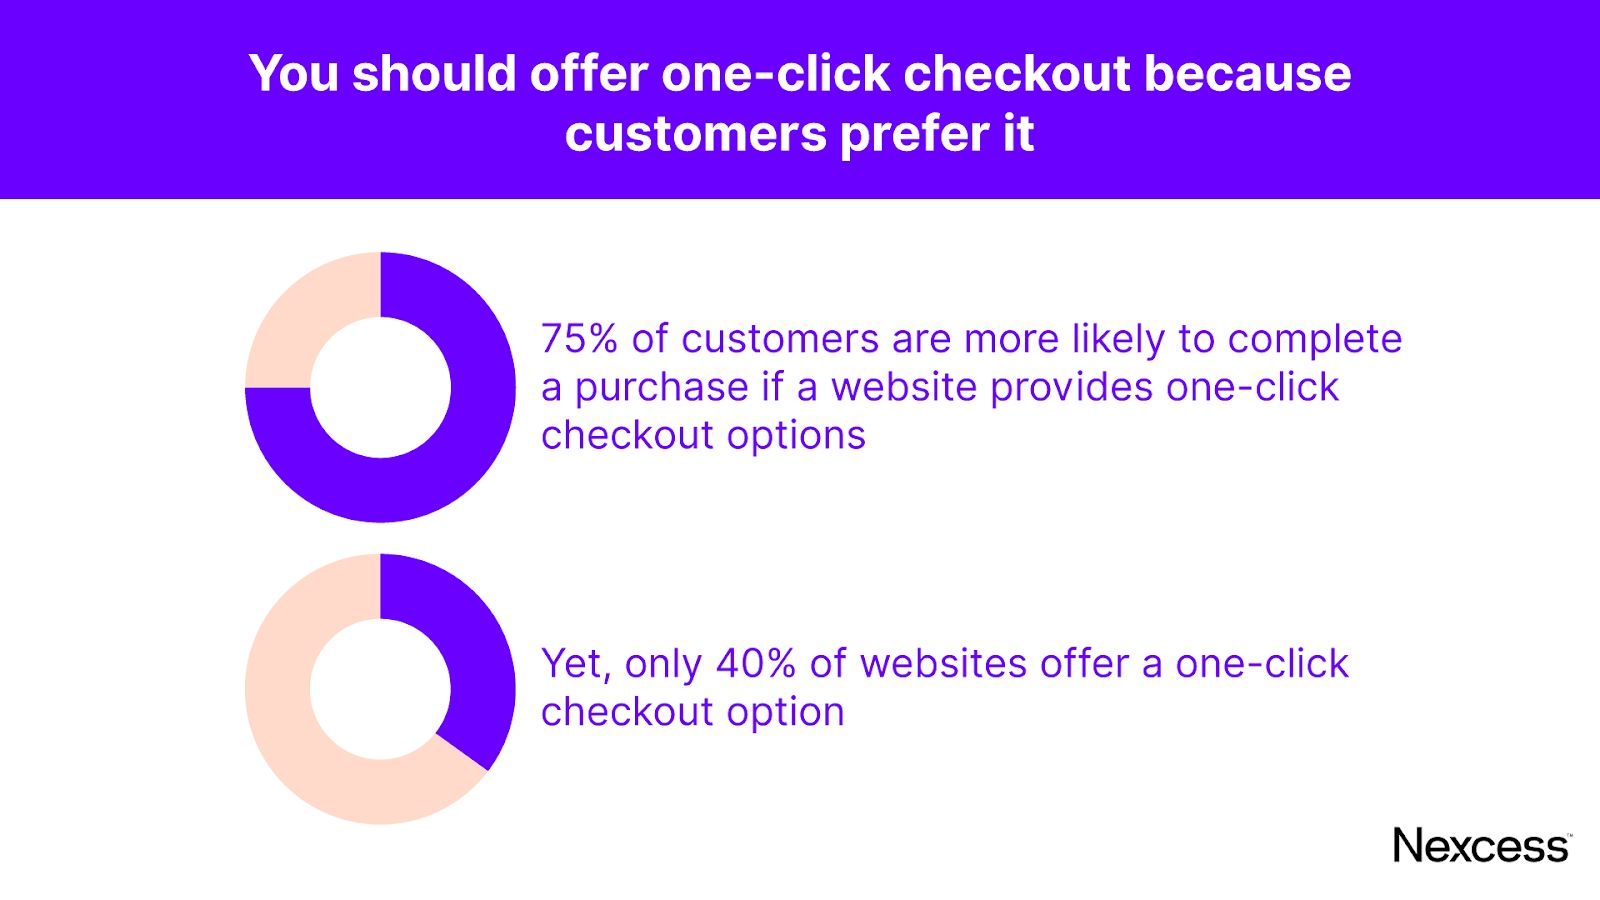 Online stores need to offer one-click checkout.